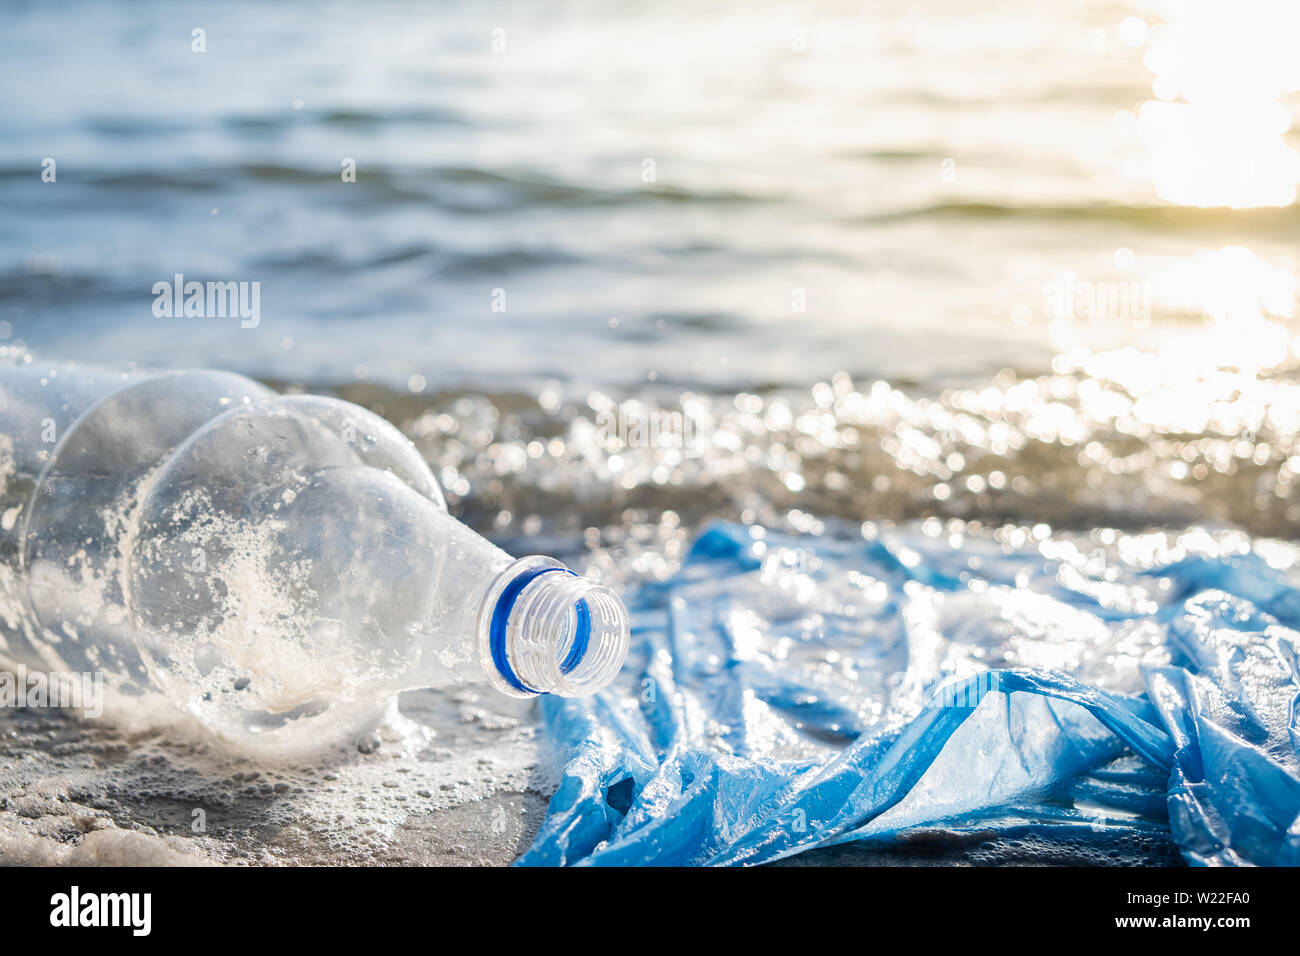 Plastic bag and bottles on the beach, seashore and water pollution concept. Trash (empty food package) thrown away at the seaside, close-up view in di Stock Photo